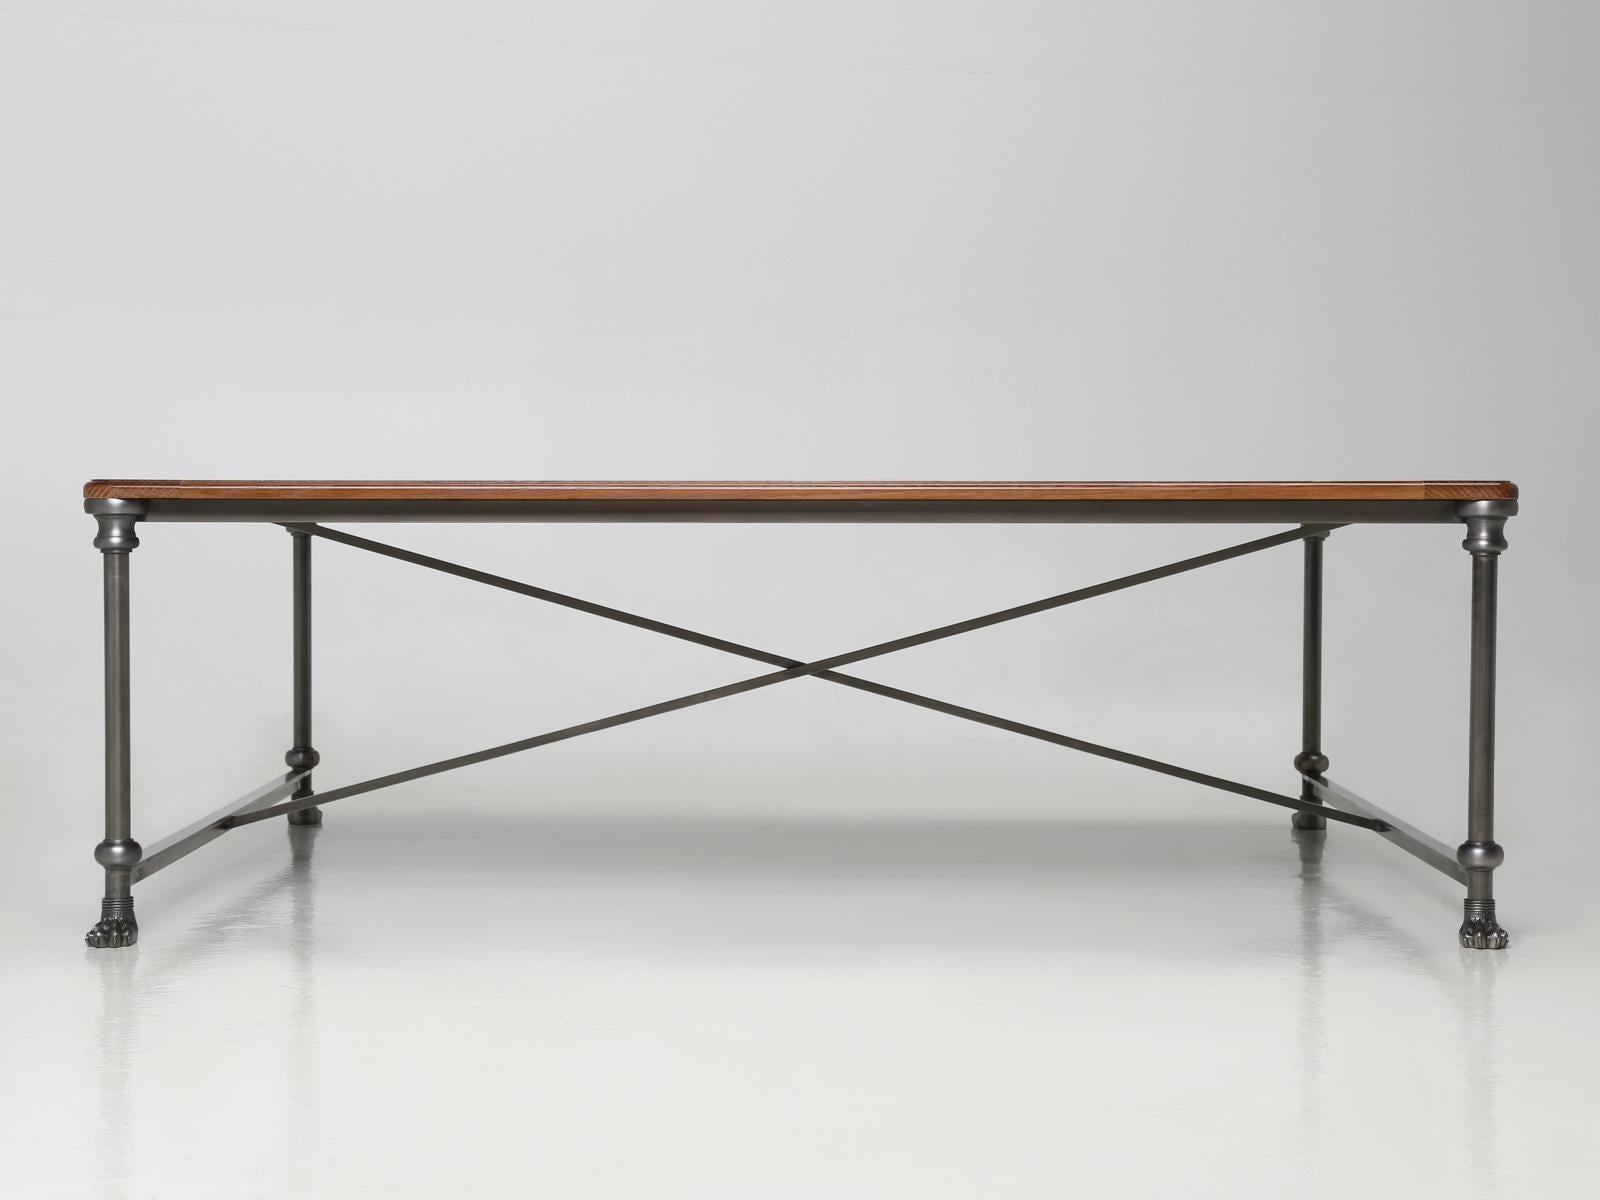 North American French Industrial Inspired Coffee Table in Stainless Steel Any Dimension, Finish For Sale